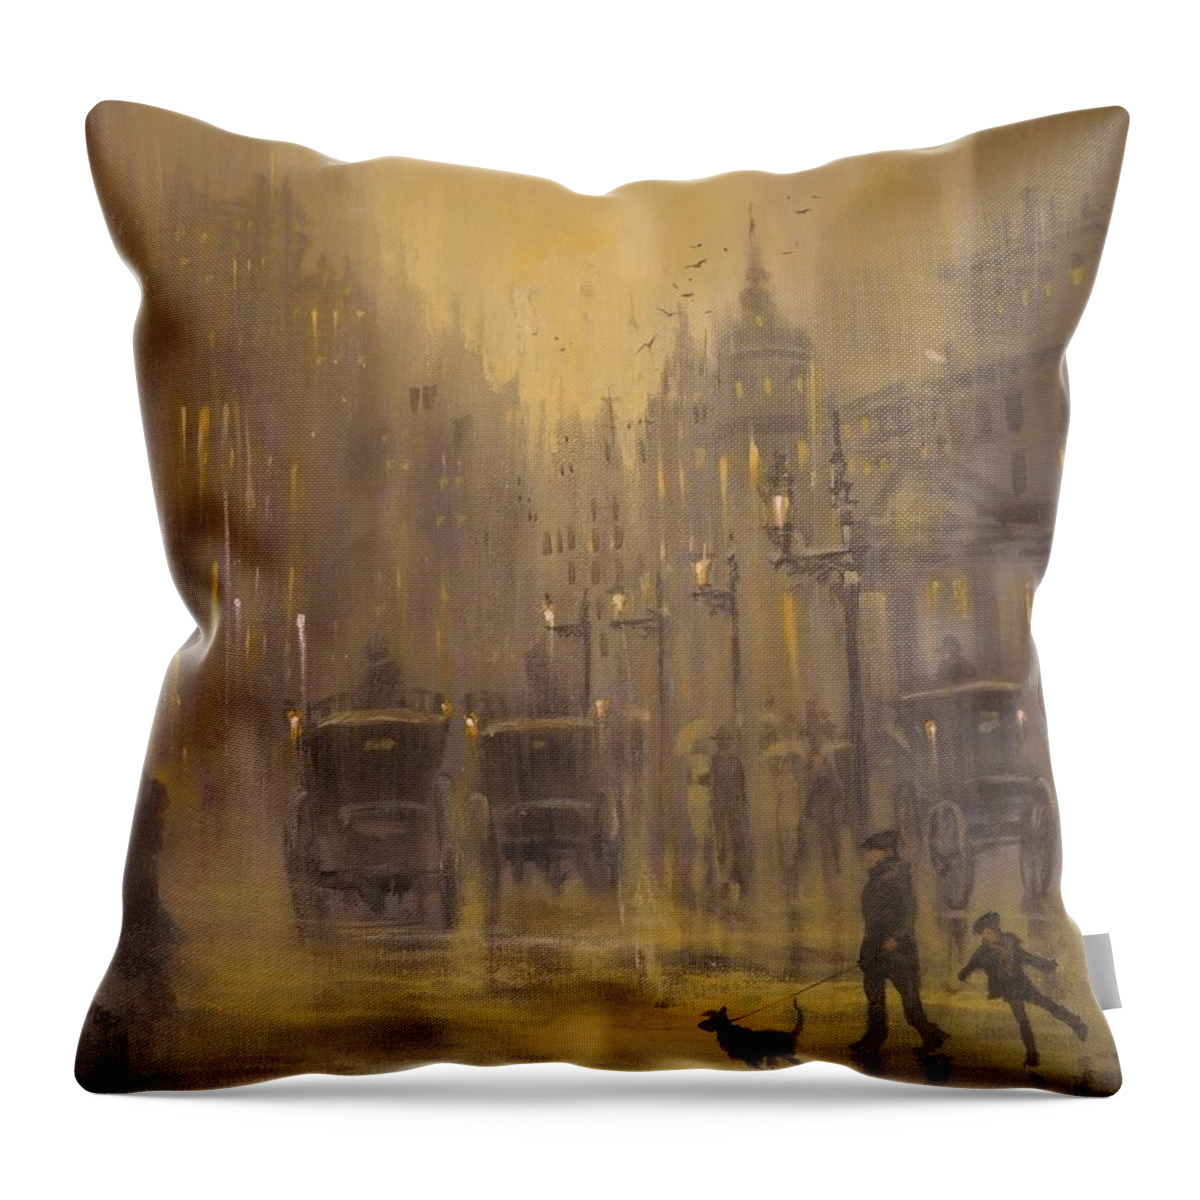 Sherlock Holmes Throw Pillow featuring the painting The Game Is Afoot by Tom Shropshire